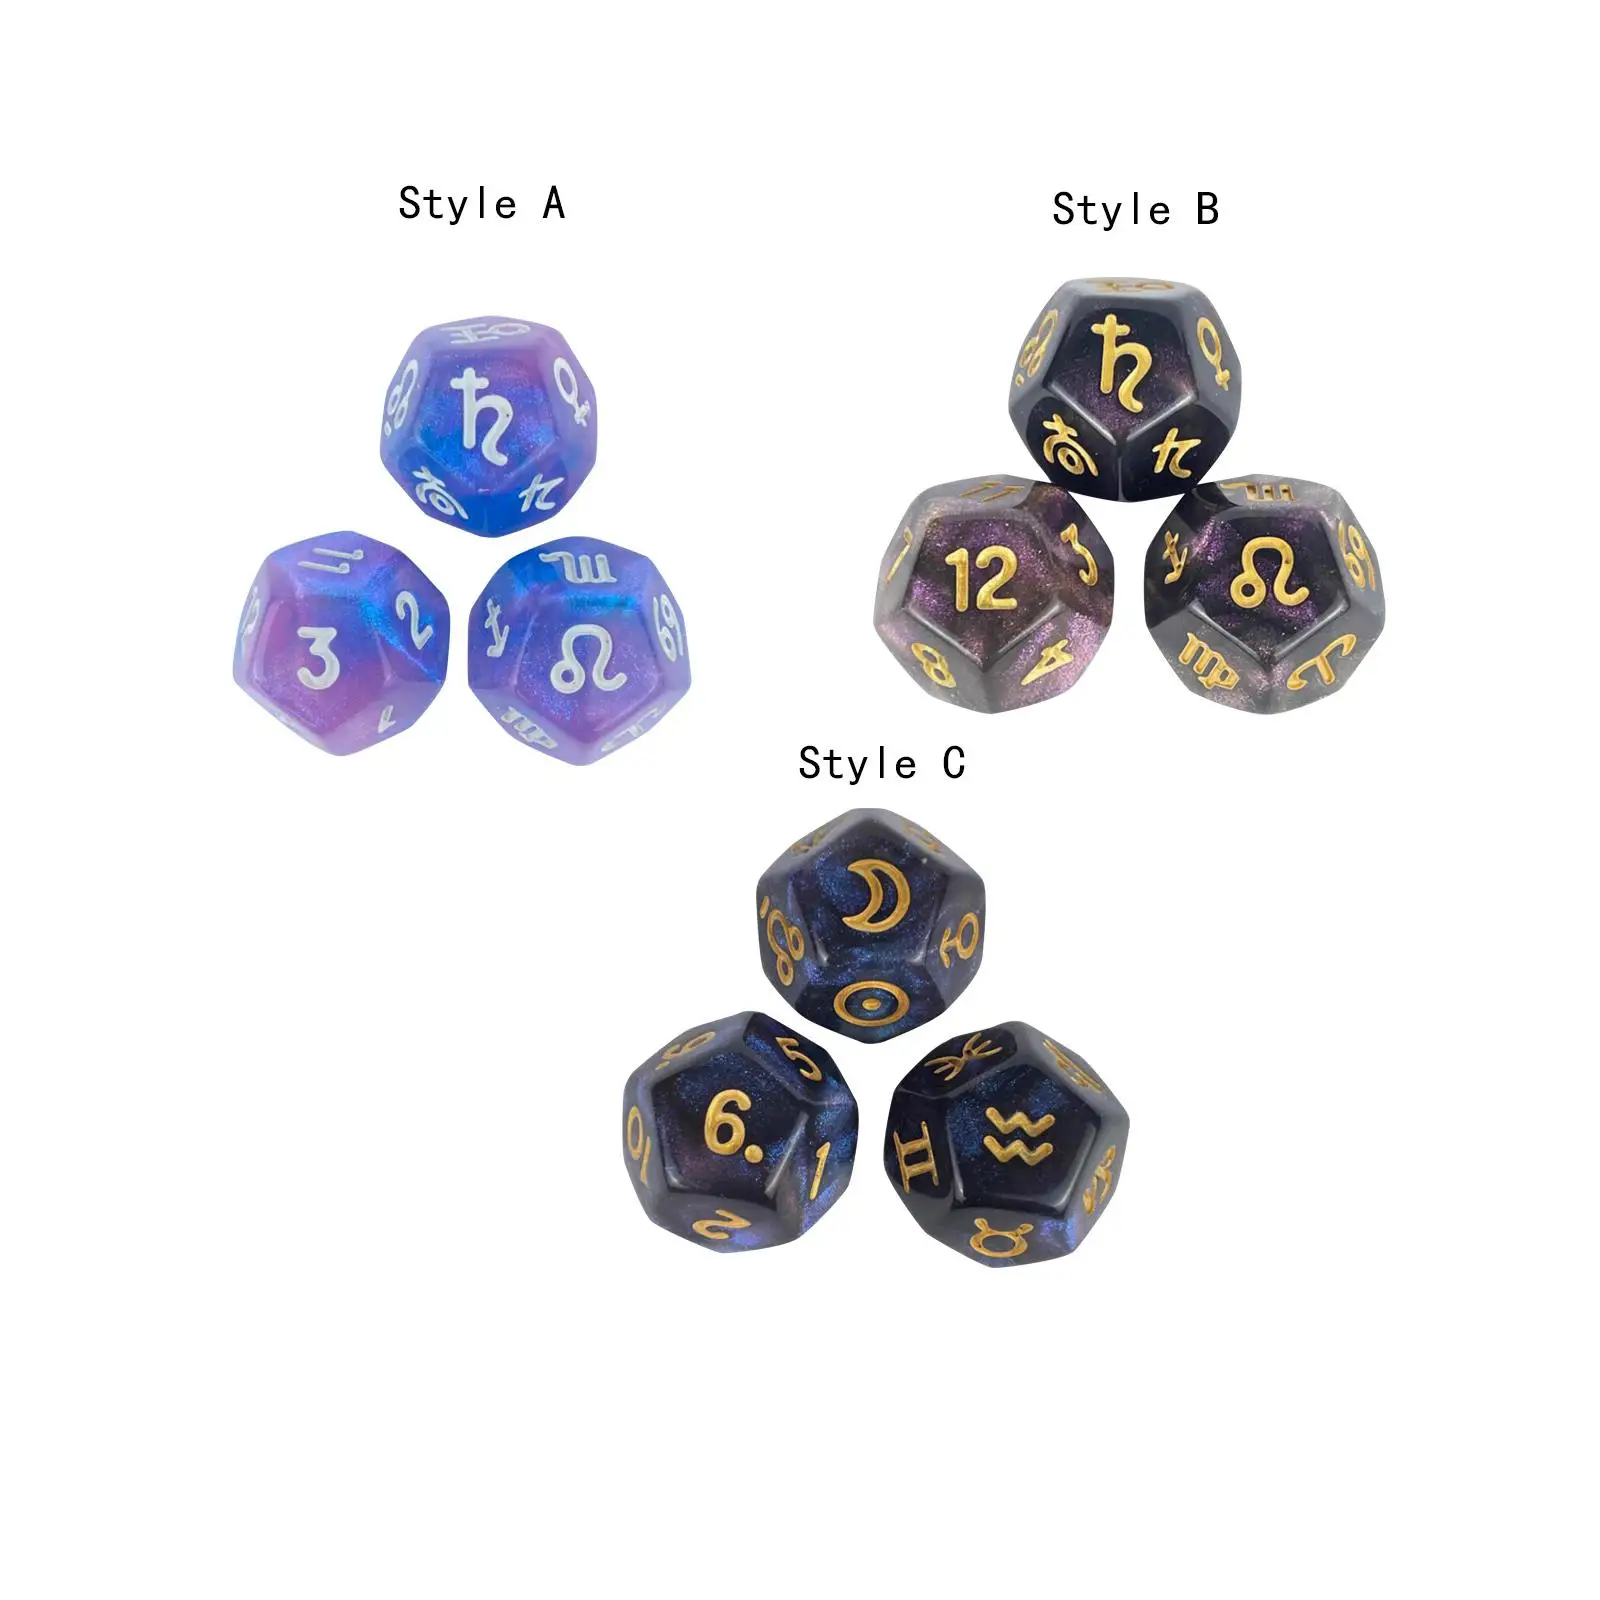 3x Tarot Cards Dice 12 Sided Polyhedral Dice Constellation Dice for Family Gathering Tarot Cards Accessory